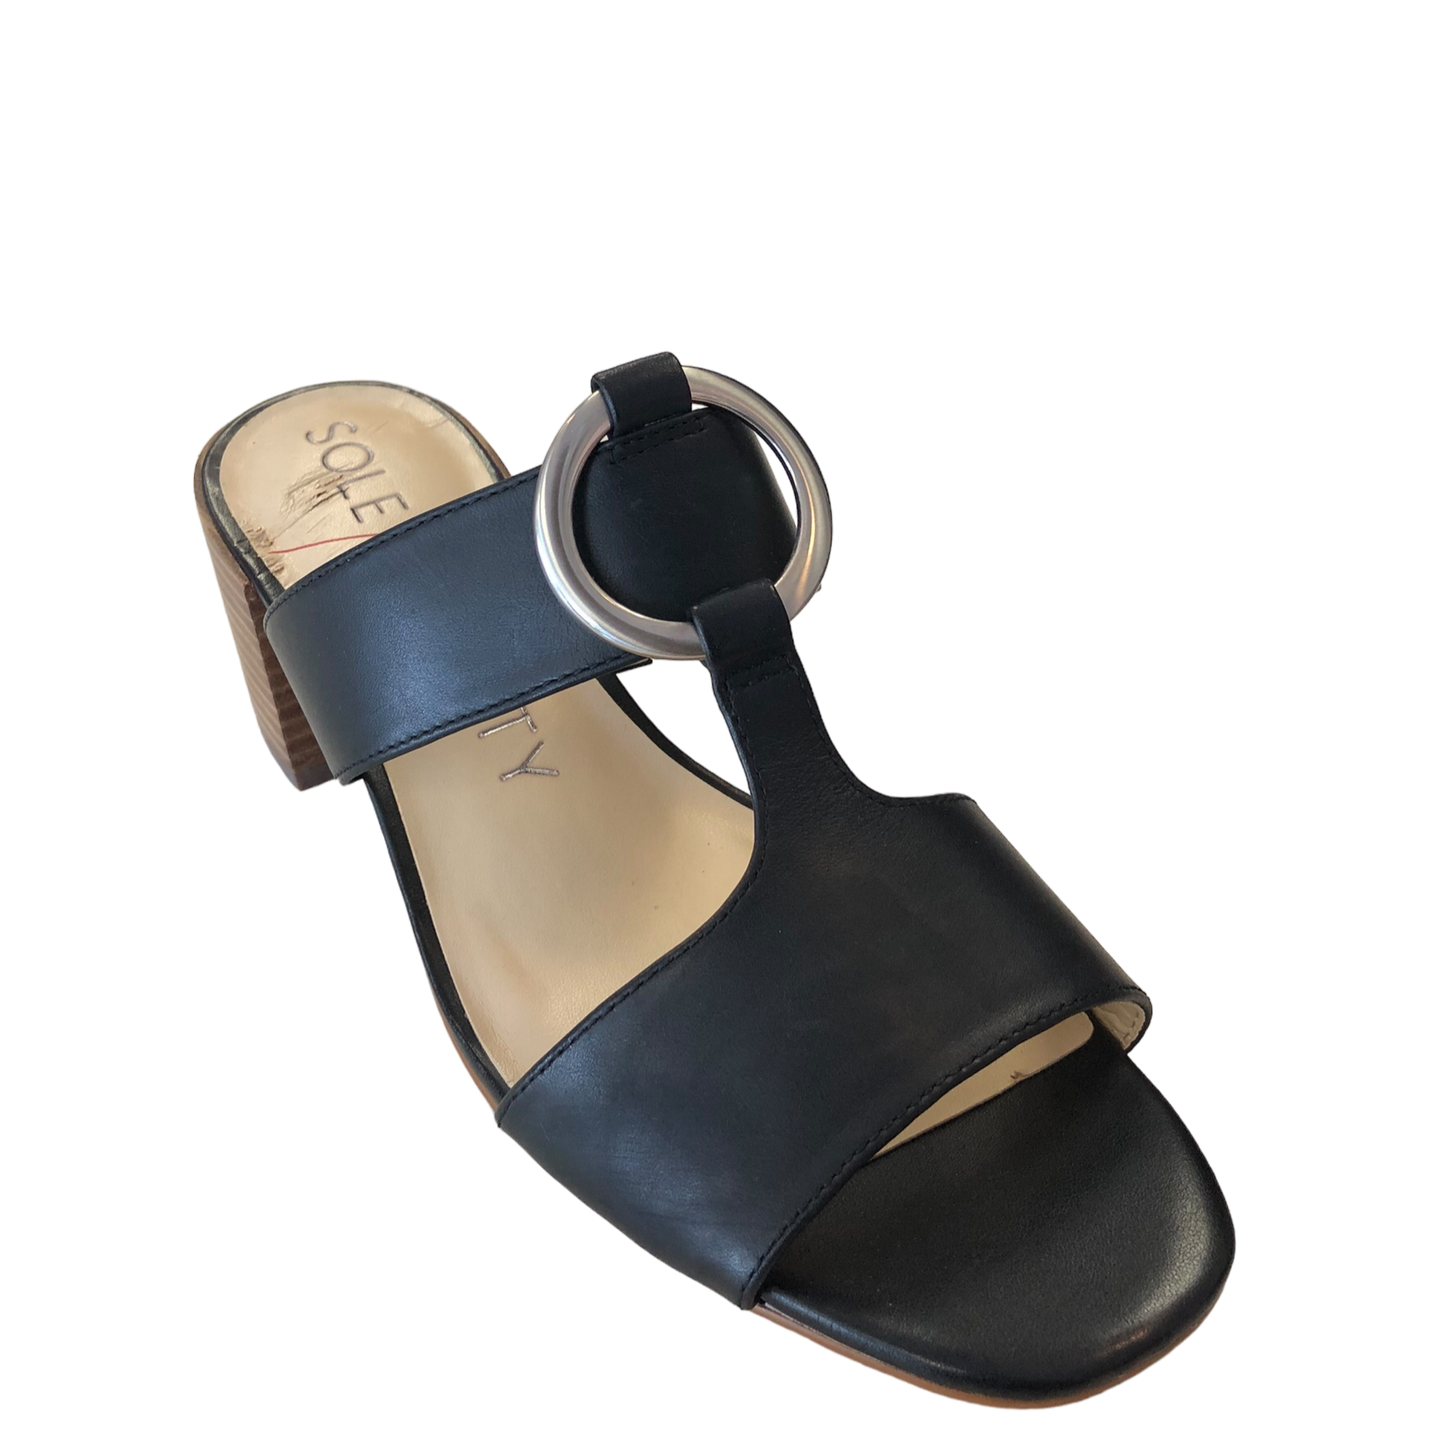 Sandals Heels Block By Sole Society  Size: 9